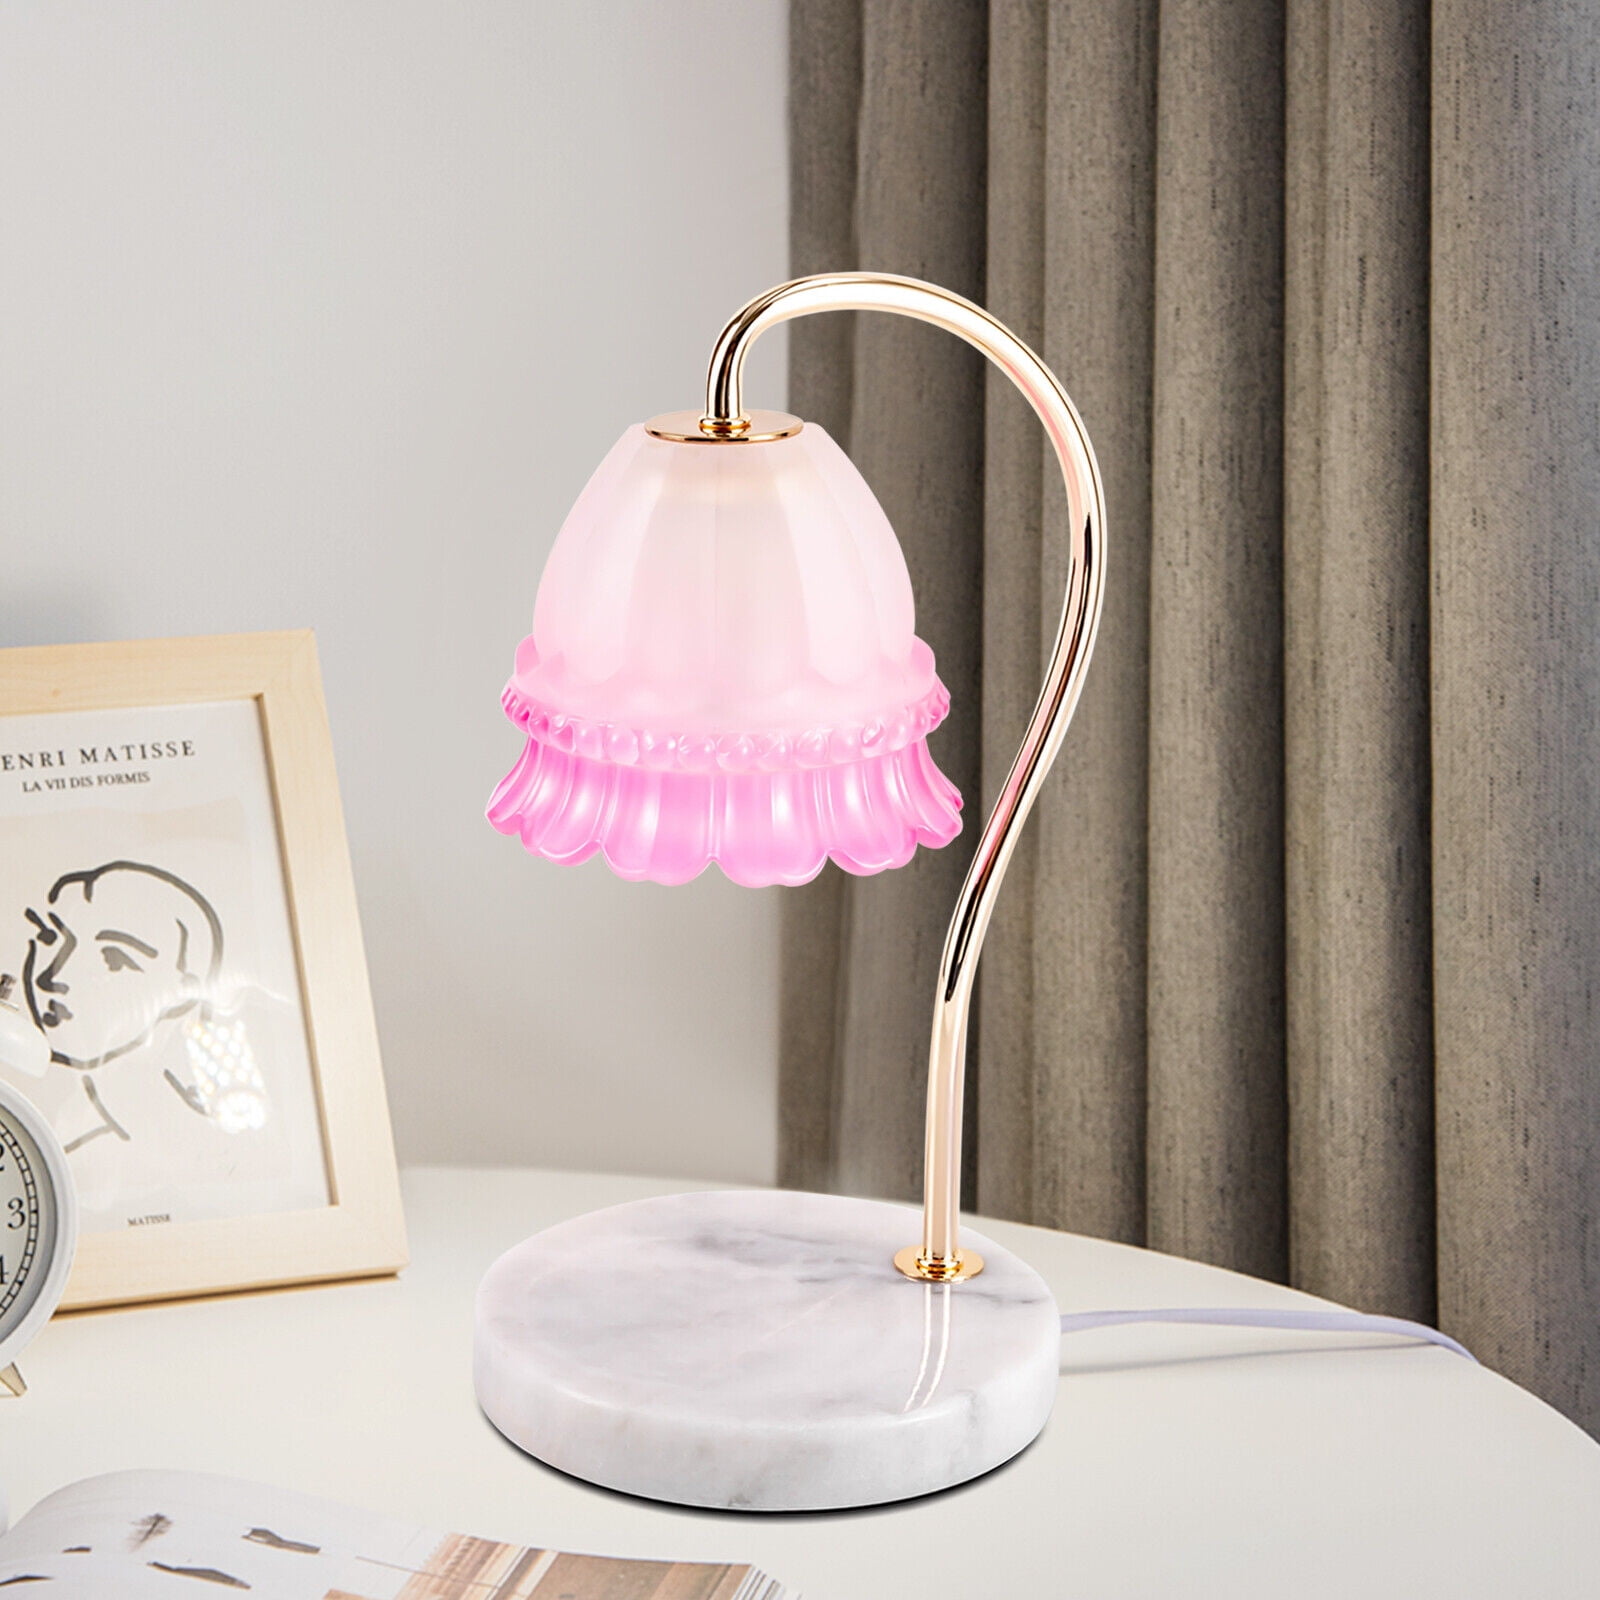 Miumaeov Electric Candle Warmer Lamp with Marble Base Candle Melting Light Electric Aromatherapy Lamp Pink, Size: 15*15*34cm/ 5.90*5.90*13.38in, White